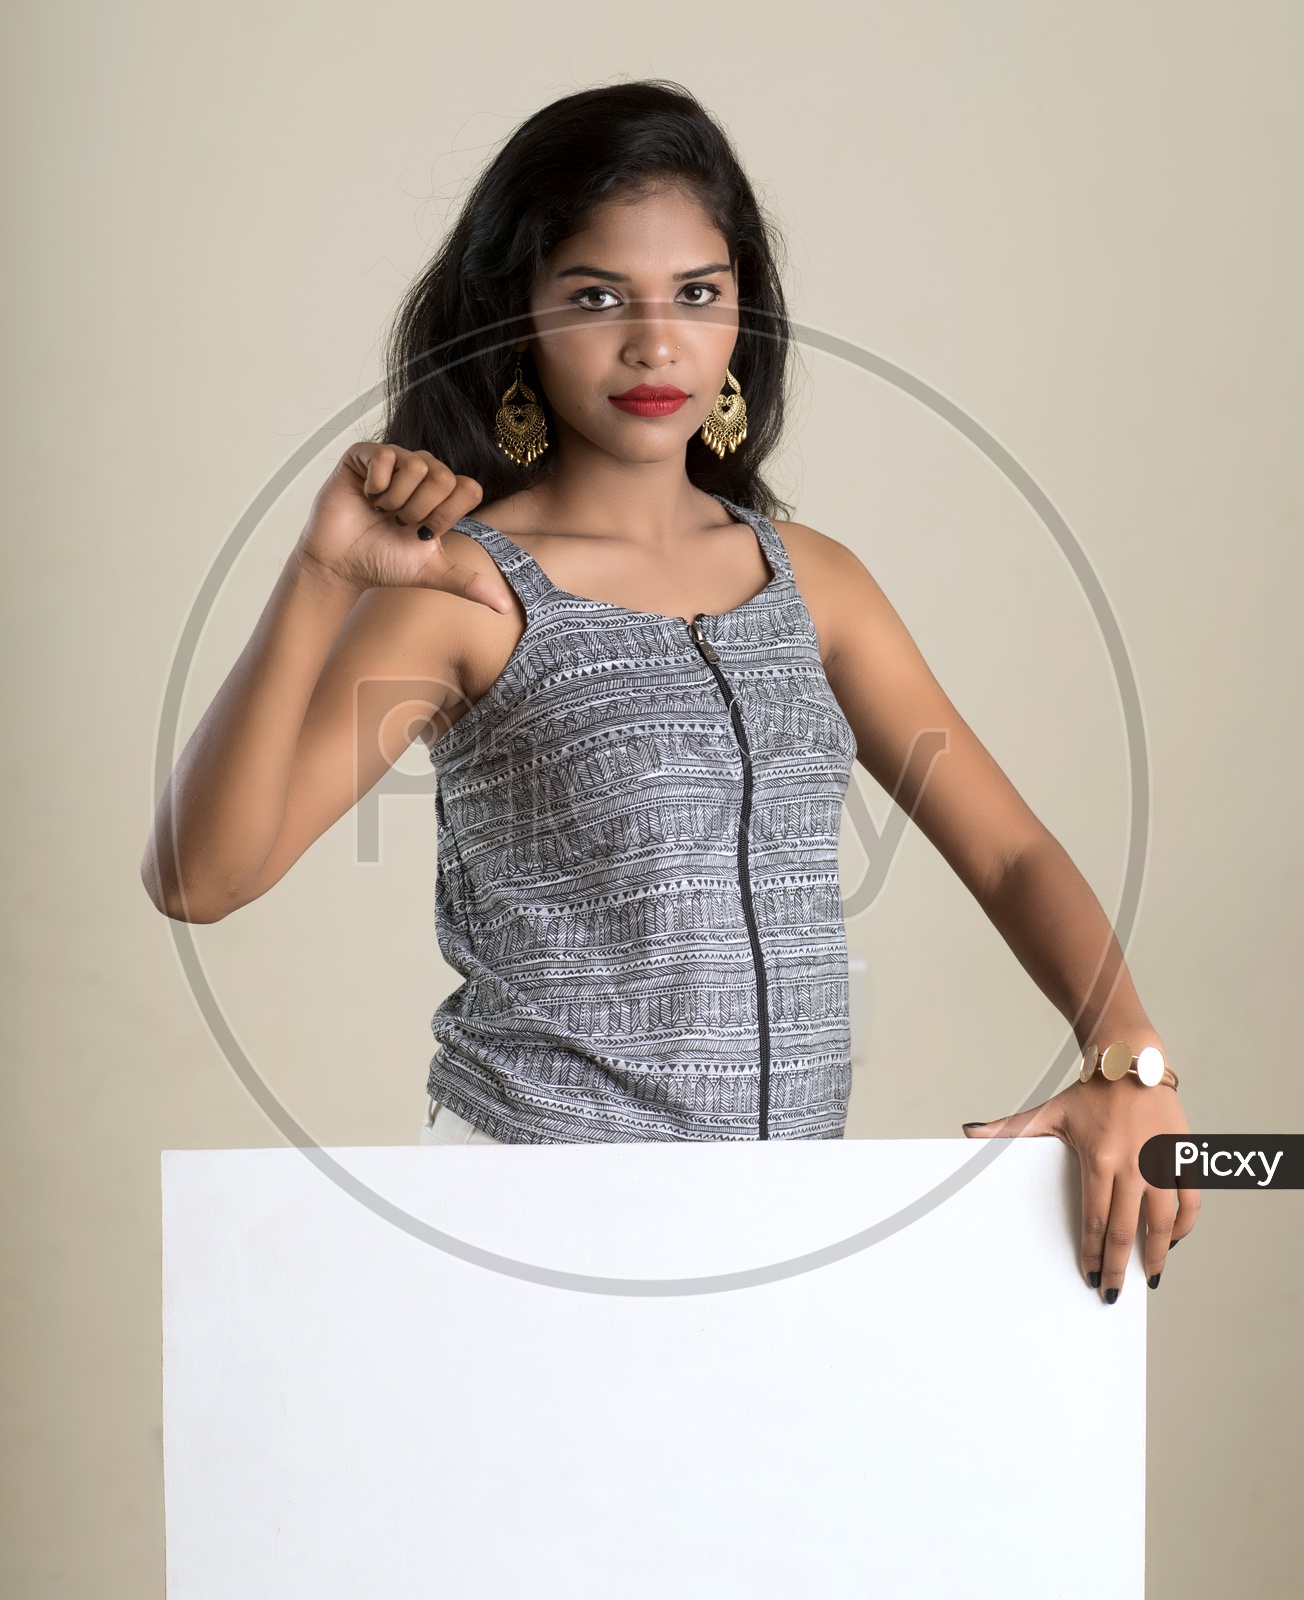 Indian woman holding a white board making a thumbs down sign